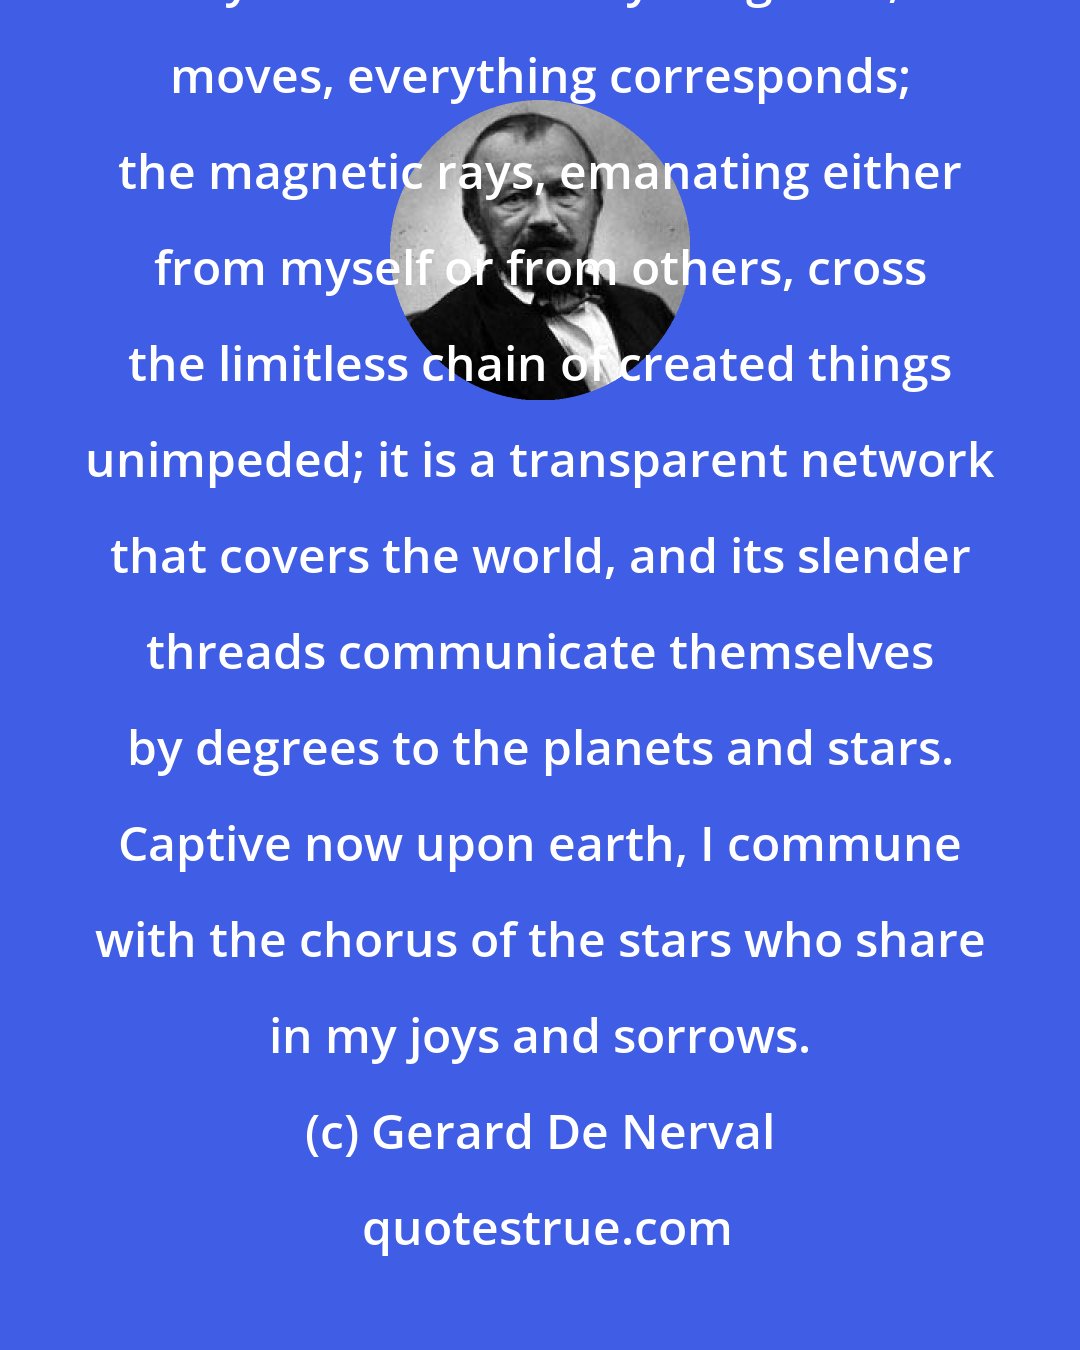 Gerard De Nerval: How have I been able to live so long outside Nature without identifying myself with it? Everything lives, moves, everything corresponds; the magnetic rays, emanating either from myself or from others, cross the limitless chain of created things unimpeded; it is a transparent network that covers the world, and its slender threads communicate themselves by degrees to the planets and stars. Captive now upon earth, I commune with the chorus of the stars who share in my joys and sorrows.